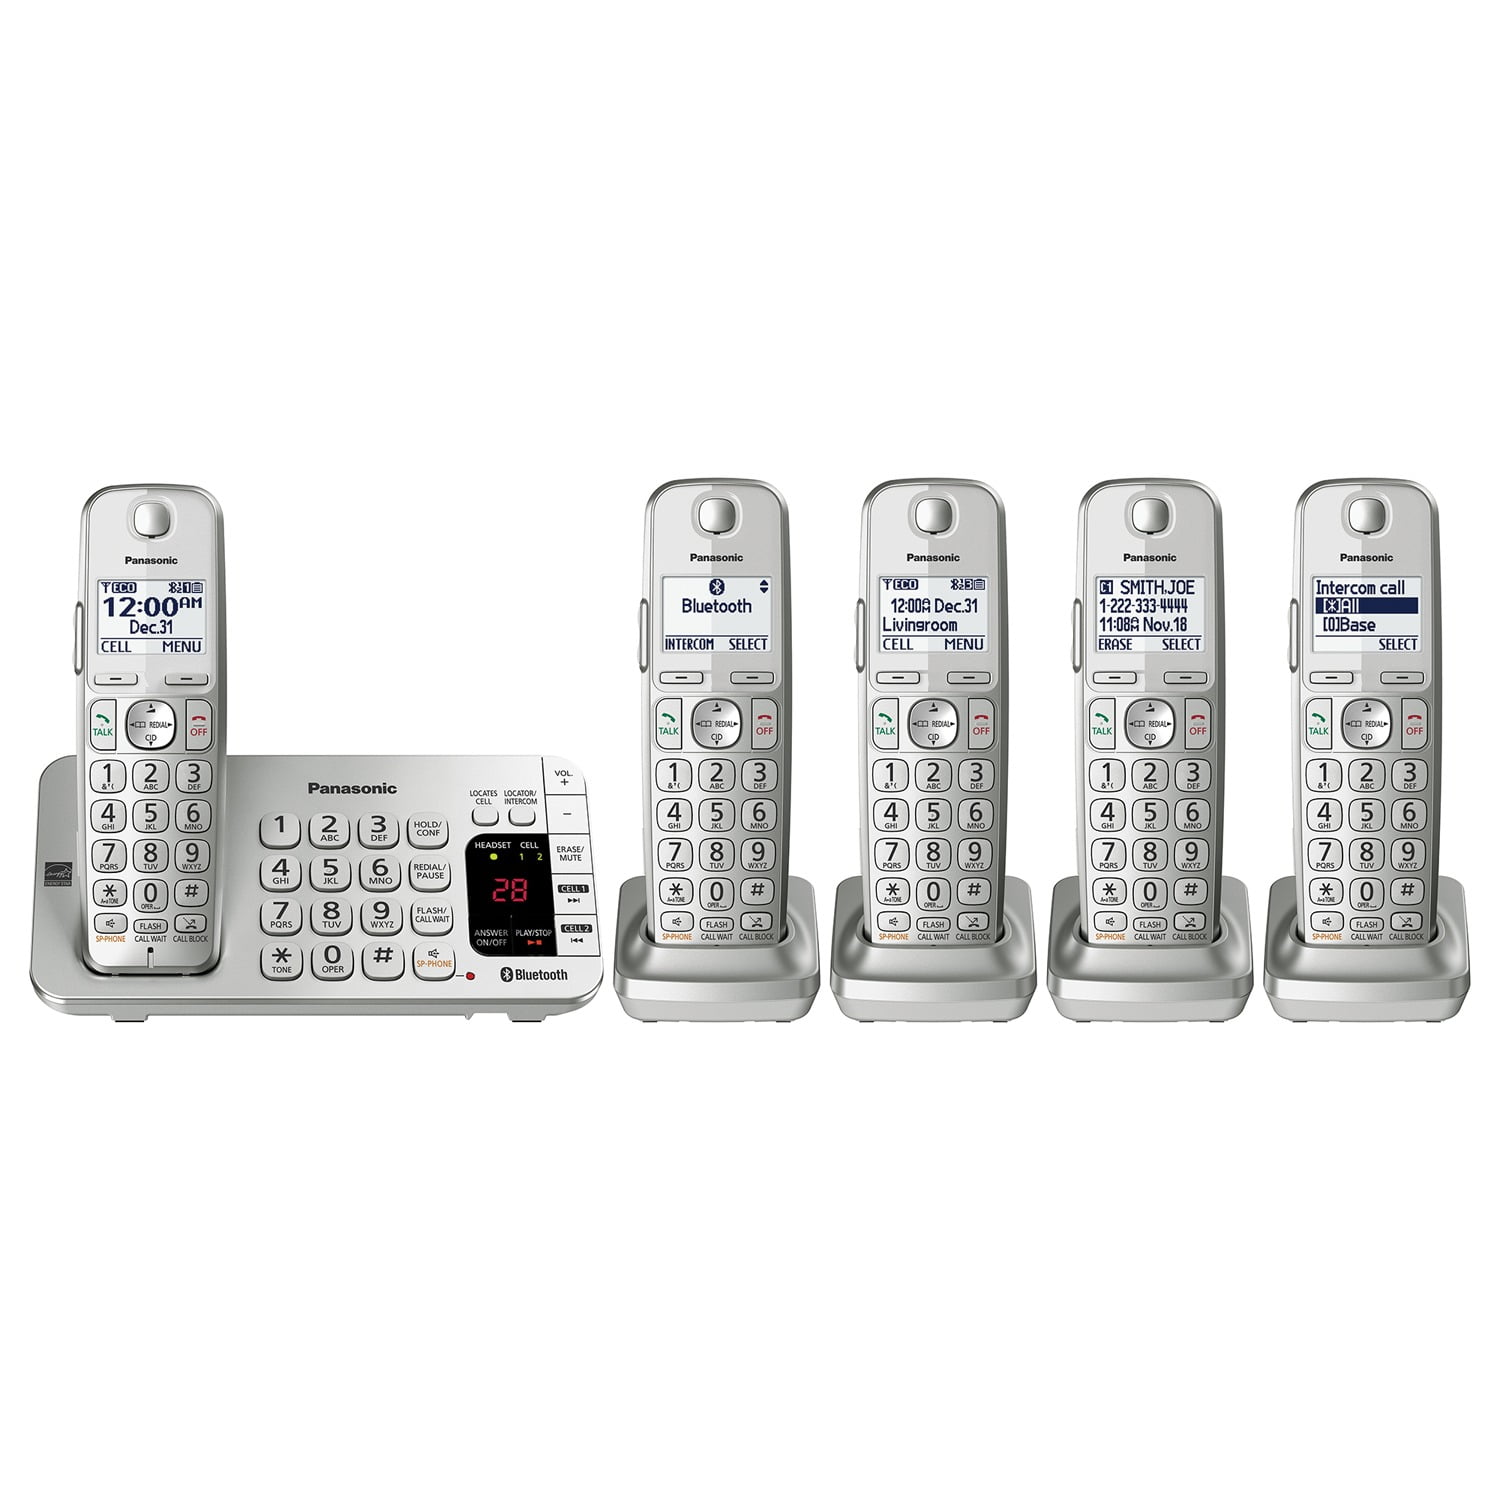 5 Handsets Renewed Panasonic KX-TGF575S Link2Cell BluetoothCordless Phone with Voice Assist and Answering Machine 